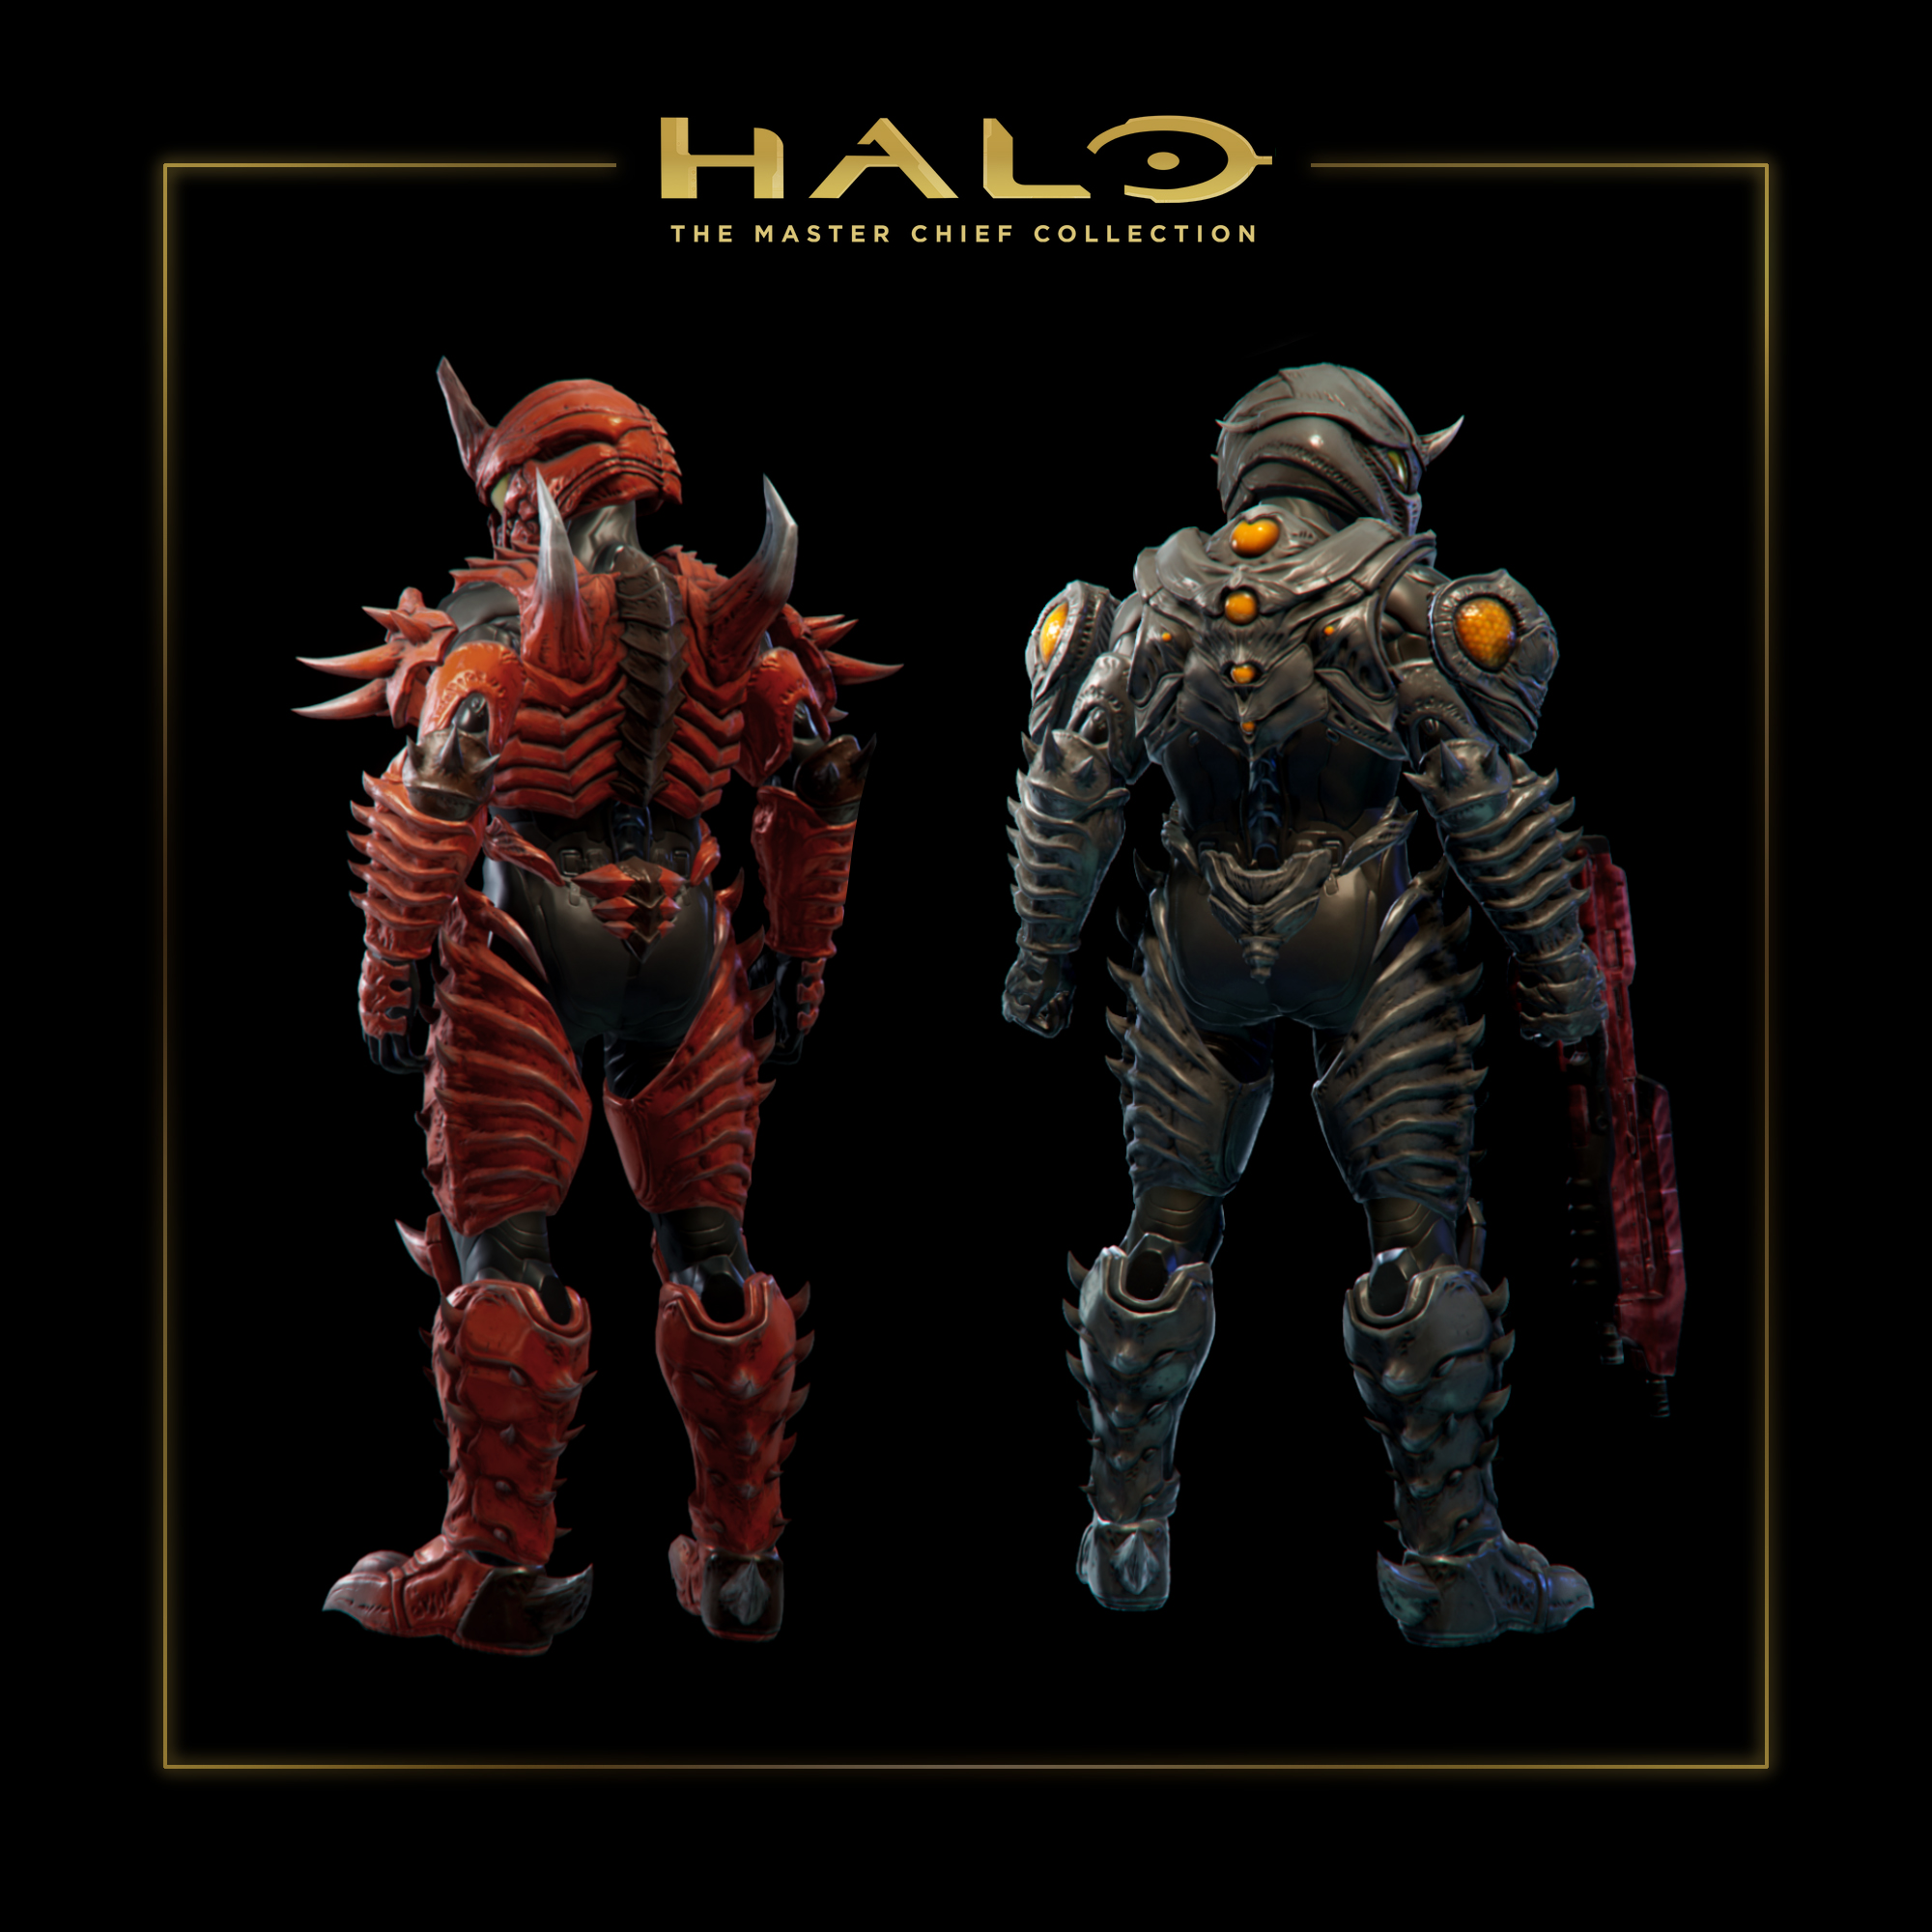 Bioroid-themed armor coming to MCC